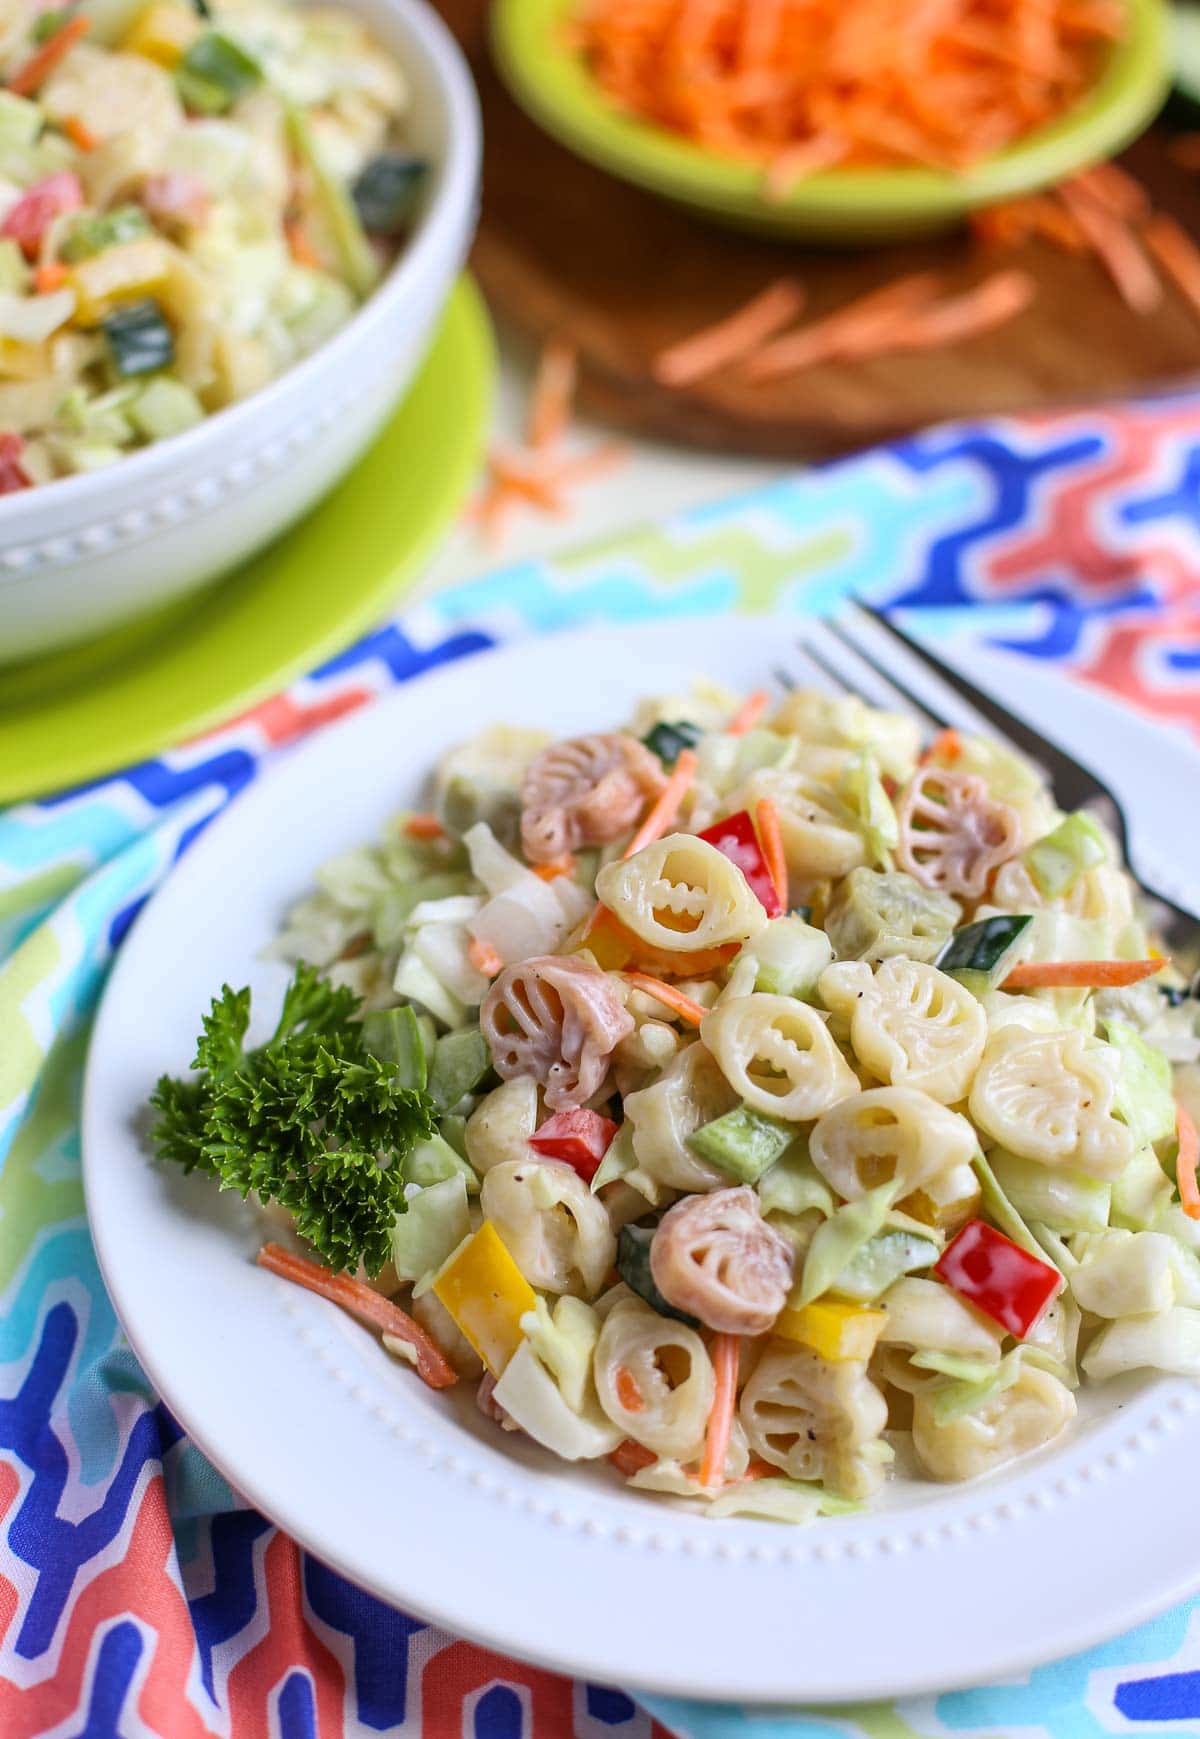 Pasta Slaw | BBQ's favorite side just got better! Pasta, cabbage, peppers, celery, etc plus a sweet and tangy sauce - it's a Wow! } WorldofPastabilities.com